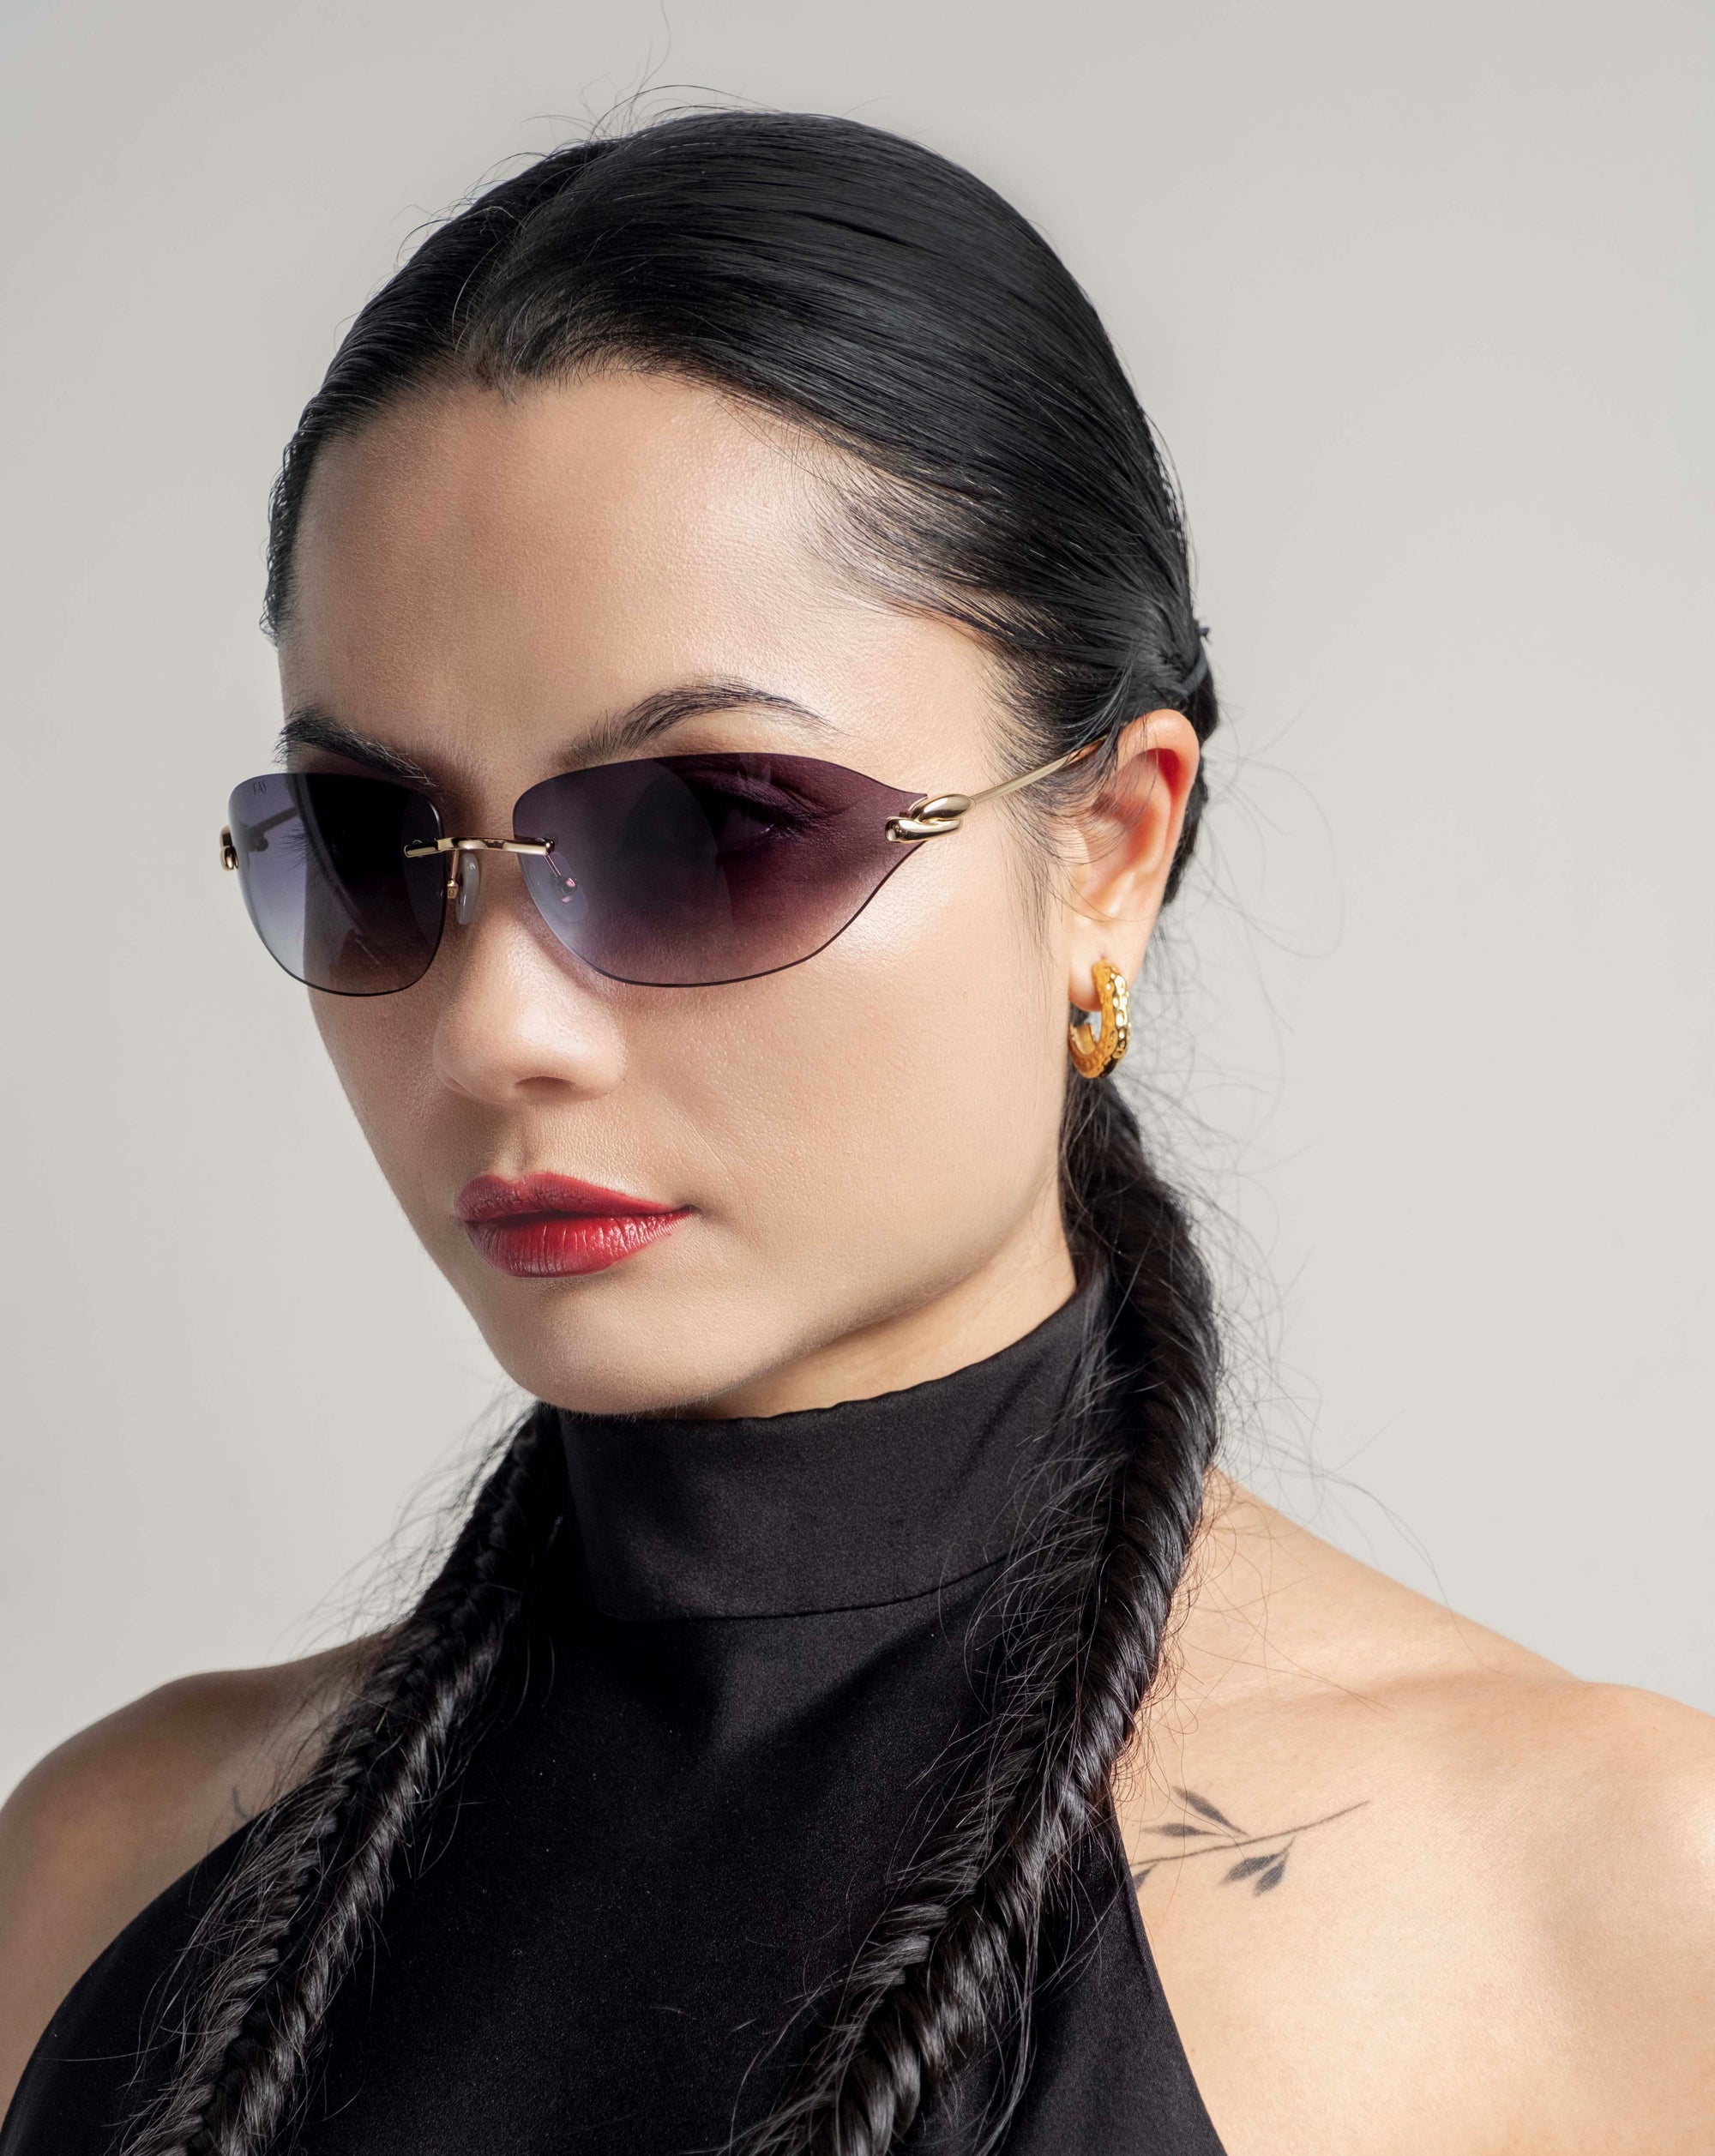 A woman with long, dark braided hair and 18-karat gold hoop earrings wears For Art&#39;s Sake® Serpent I sunglasses featuring a bold frameless wrap lens design. She has a tattoo near her shoulder and is looking confidently into the camera against a neutral background in her sleeveless black top.